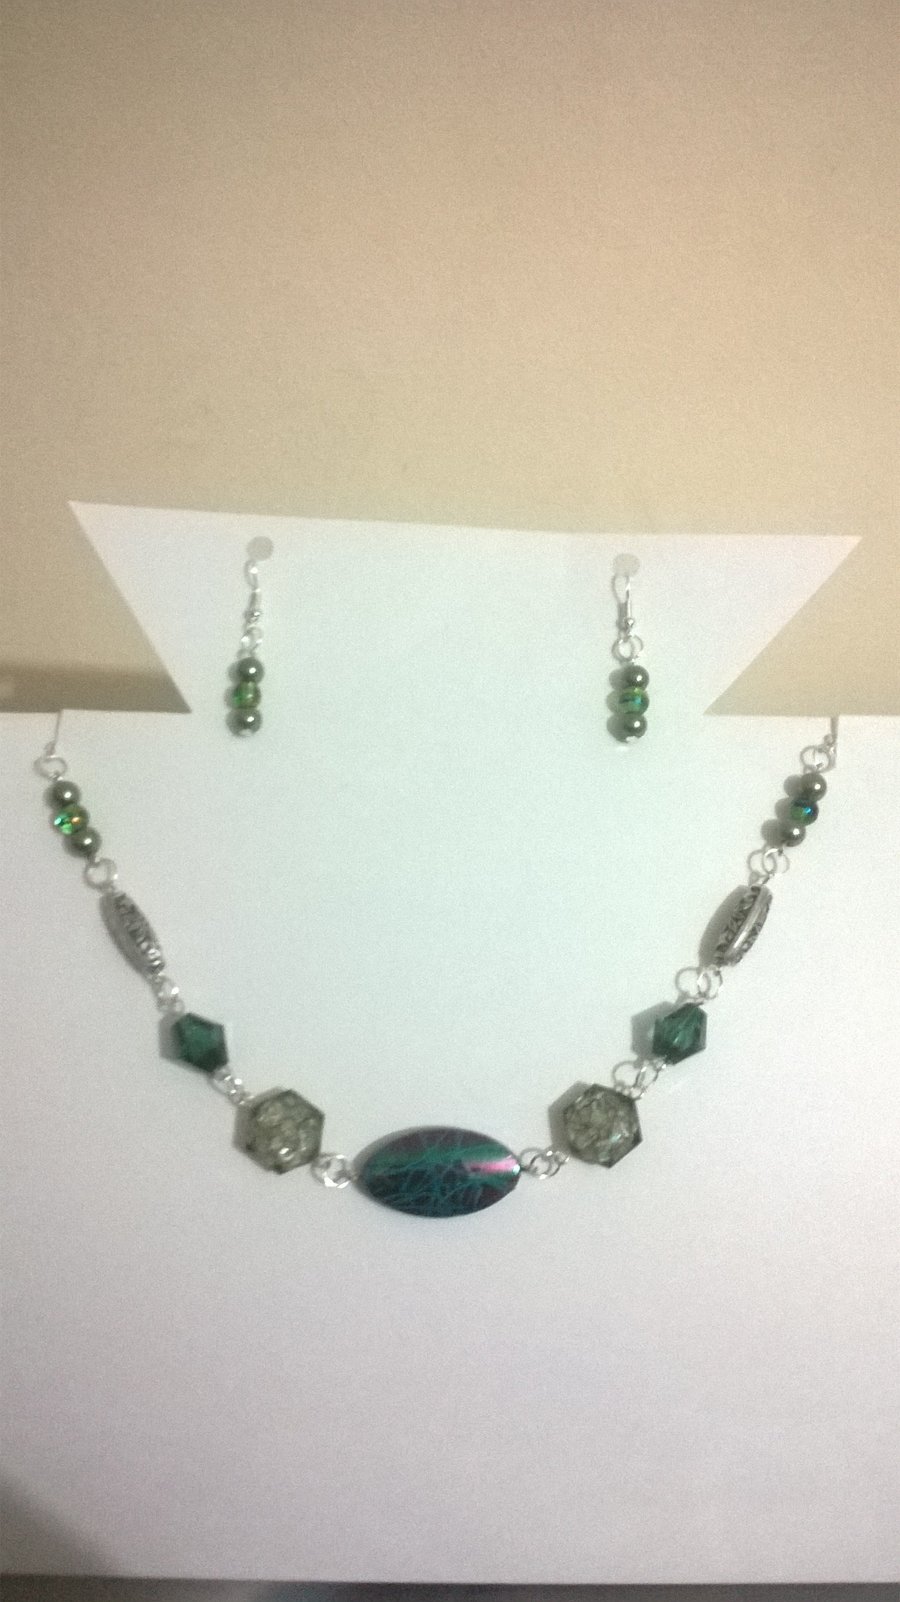 Multi shade green necklace and earring set with silver plated findings.